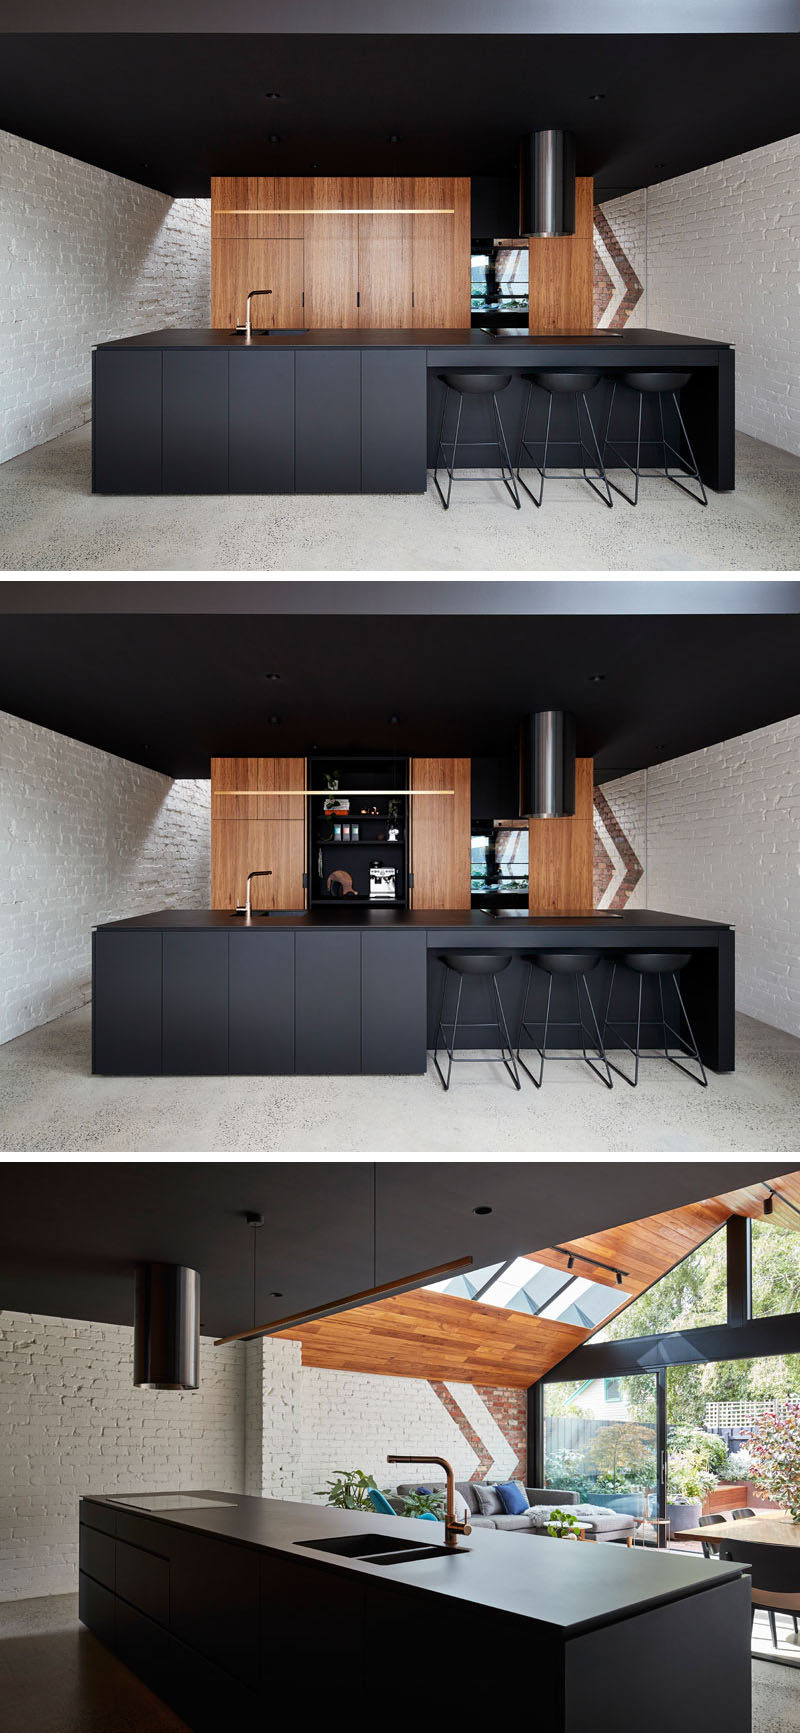 This modern kitchen features a black island and ceiling, and wood cabinets.